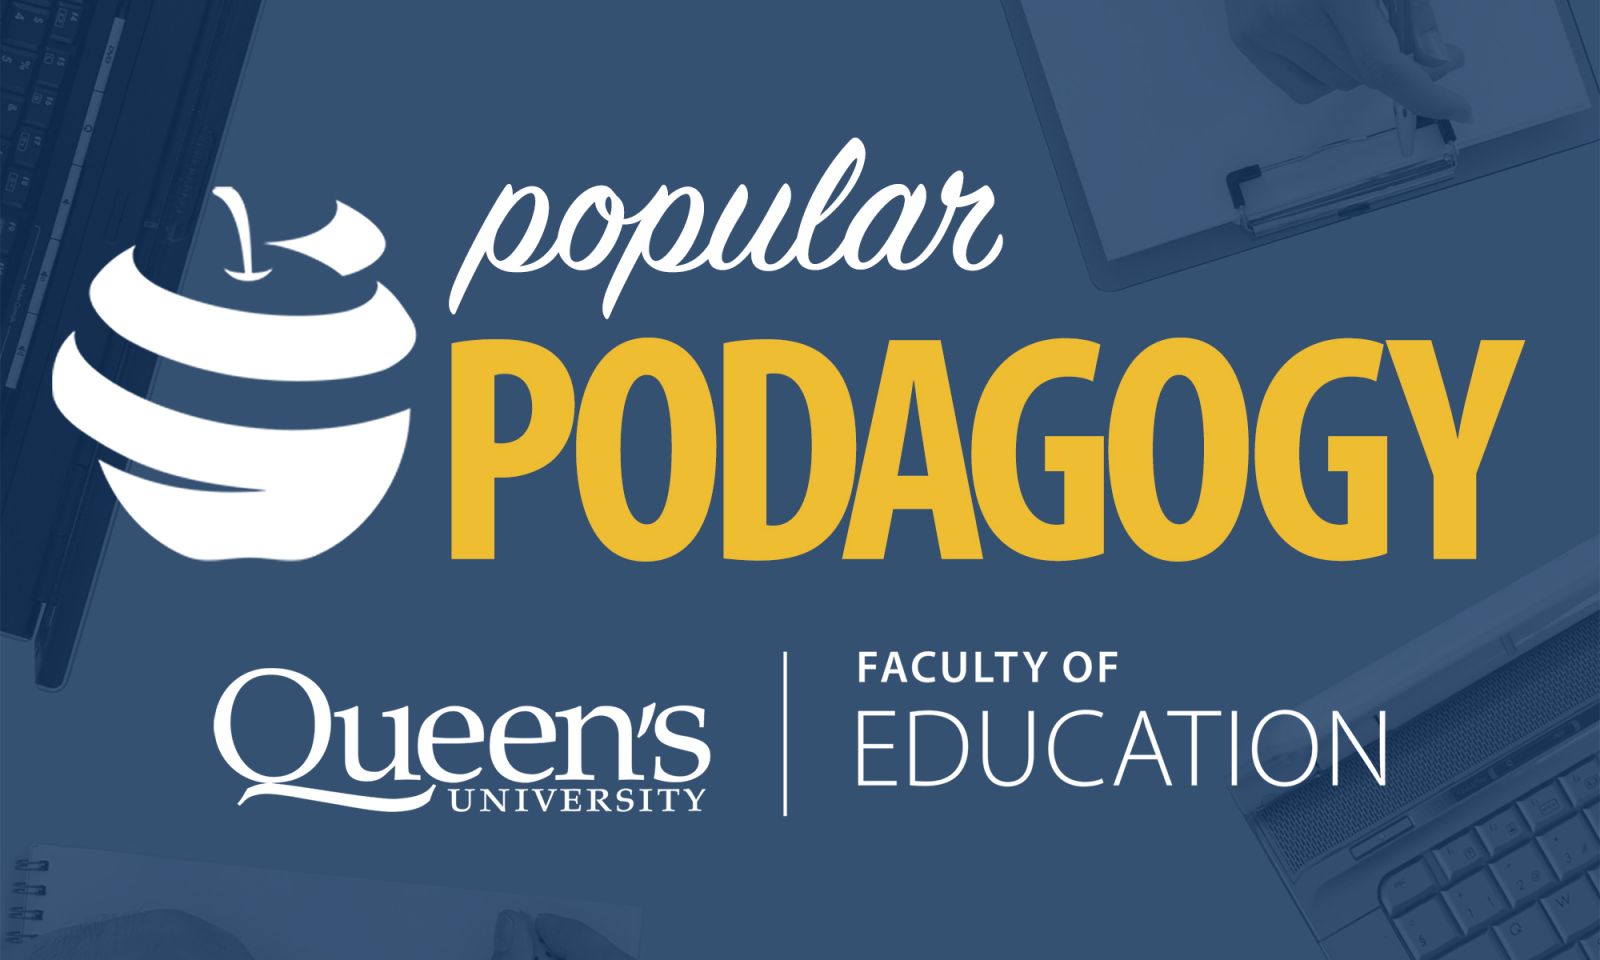 "Popular Podagogy logo- white and yellow text on blue background with an apple graphic"